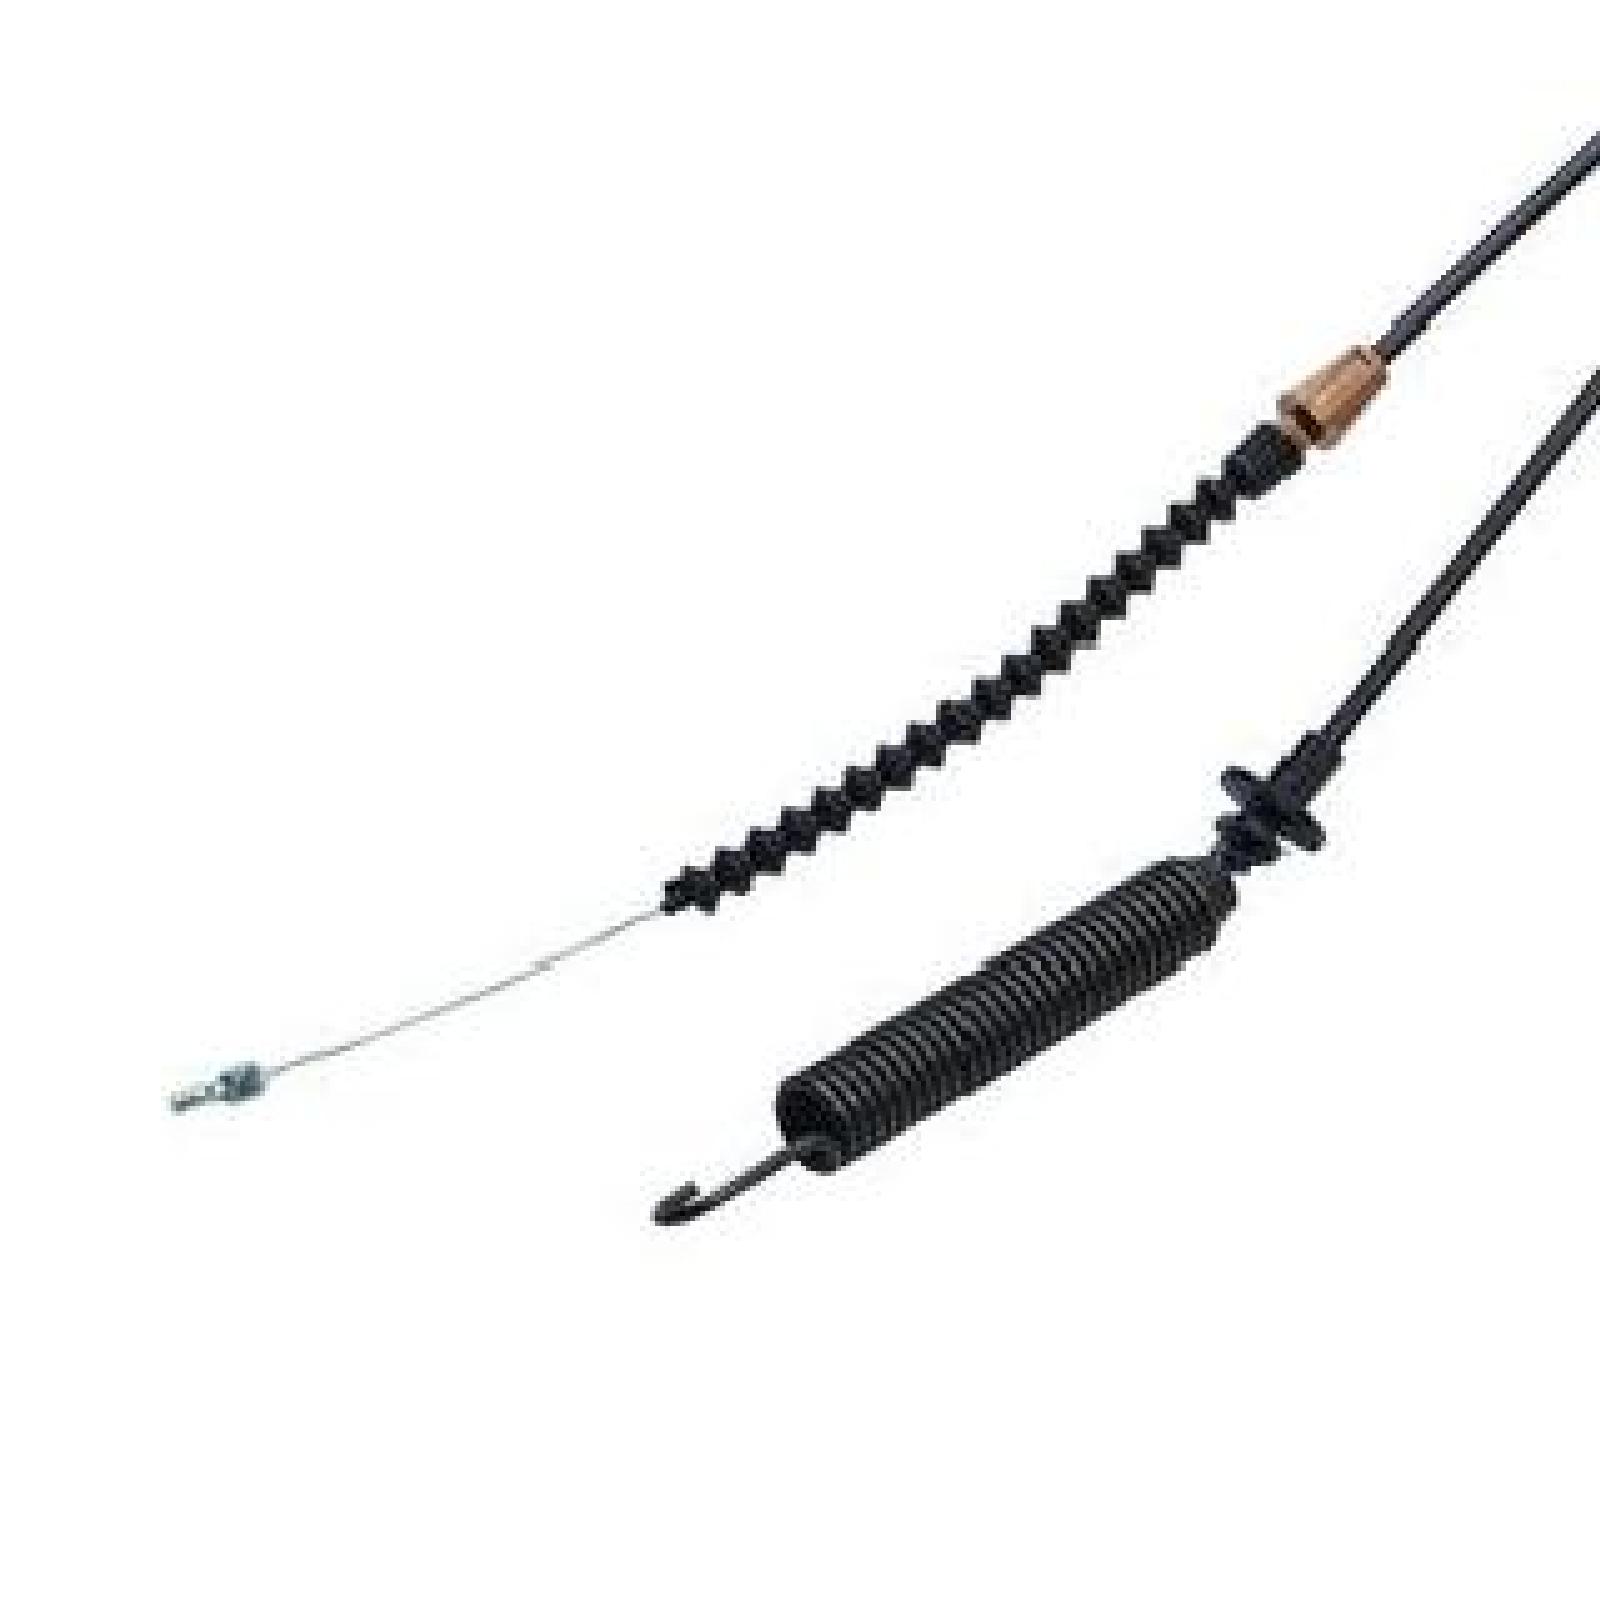 CONTROL CABLE, MTD 746 04 part# 46-041 by Oregon